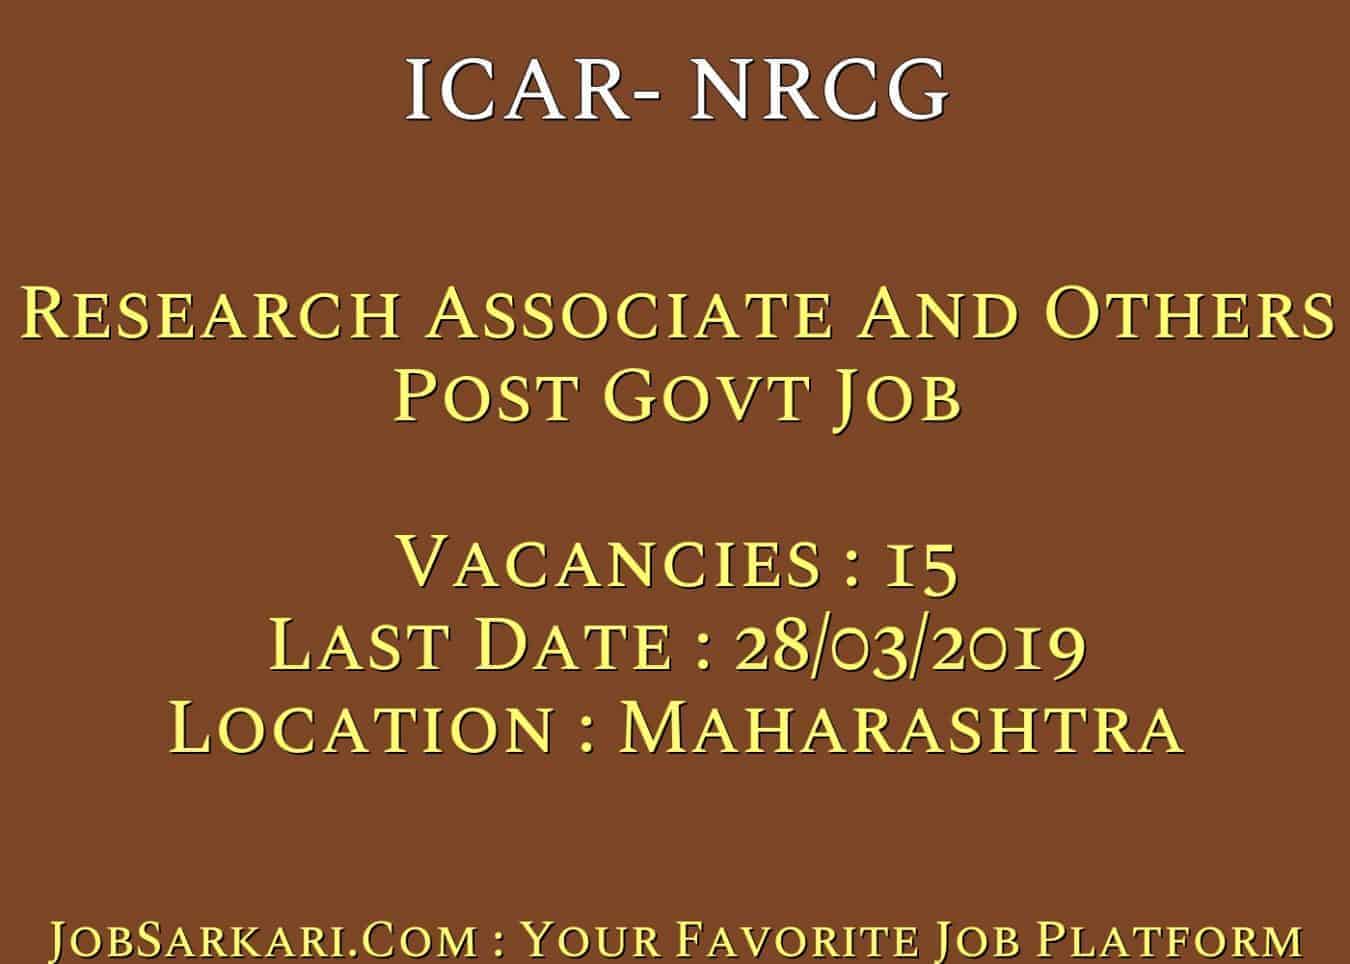 ICAR- NRCG Recruitment 2019 For Research Associate And Others Post Govt Job